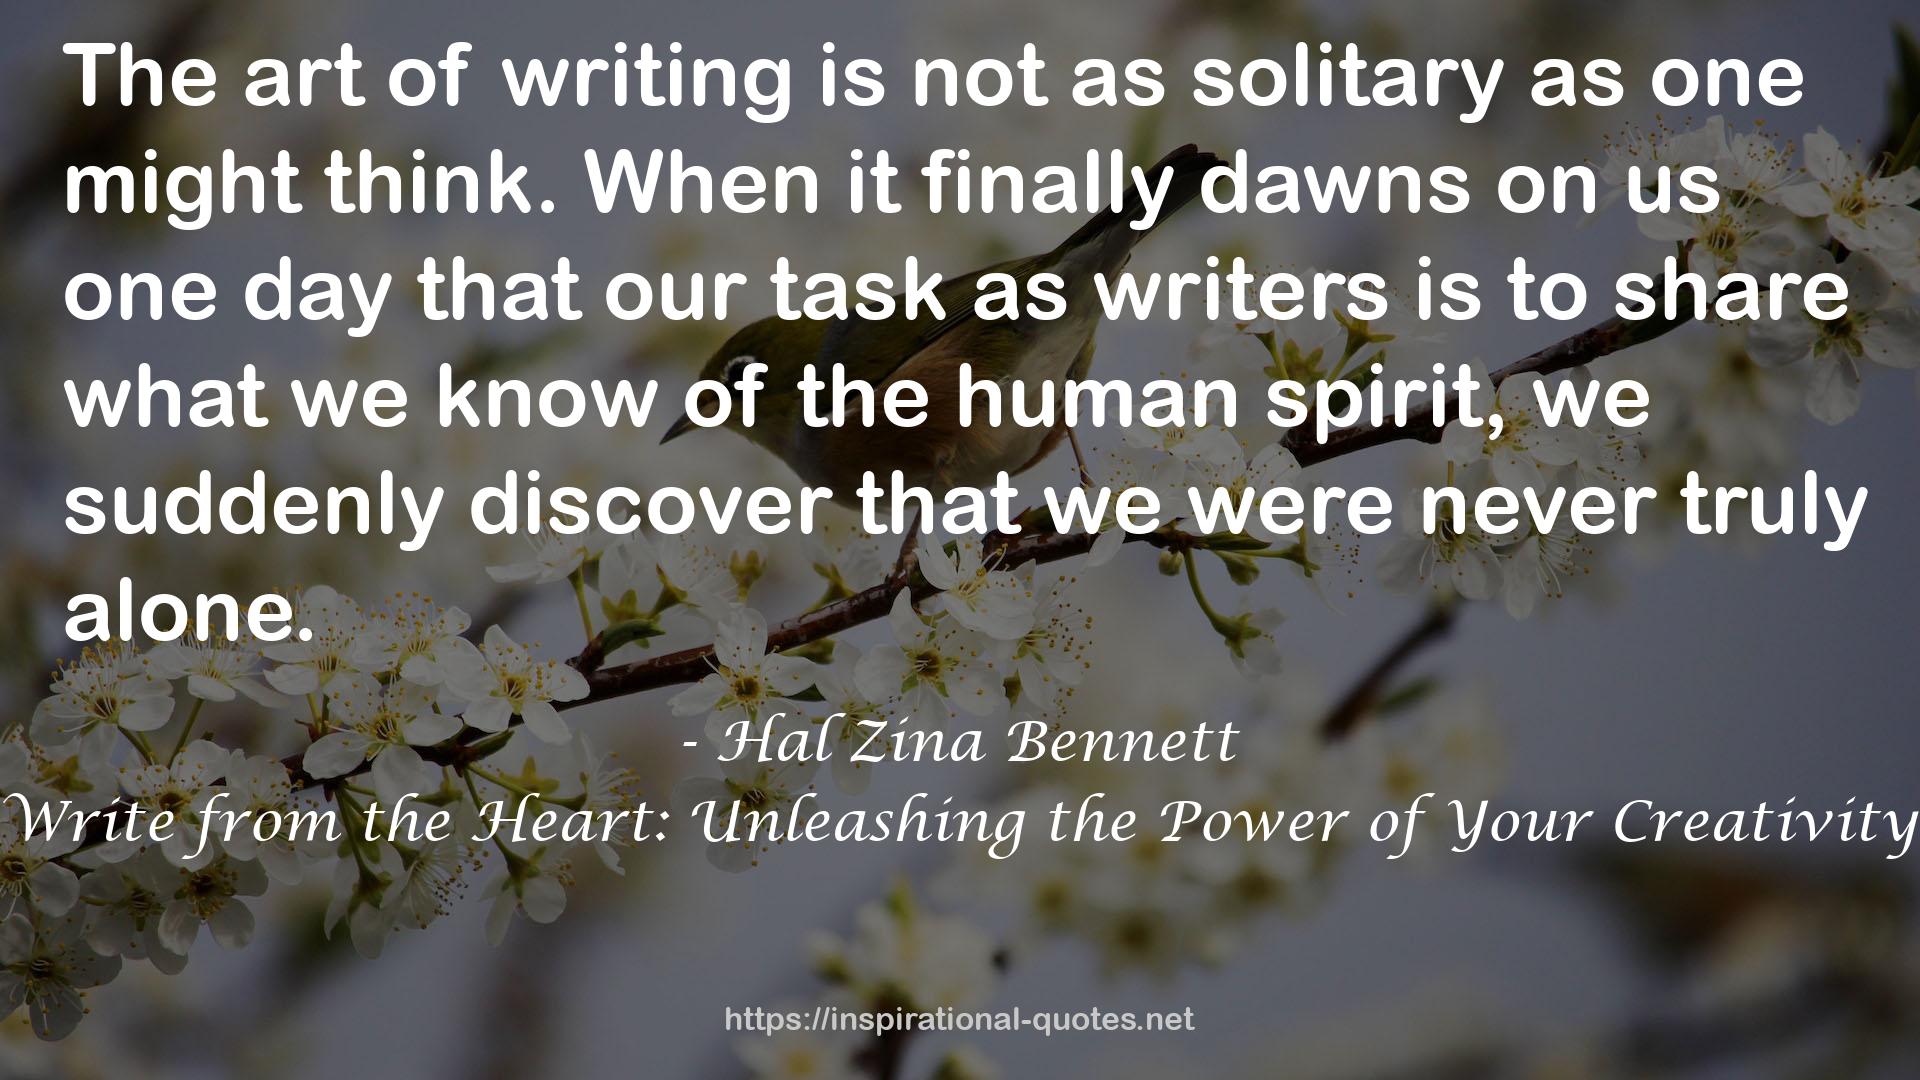 Write from the Heart: Unleashing the Power of Your Creativity QUOTES